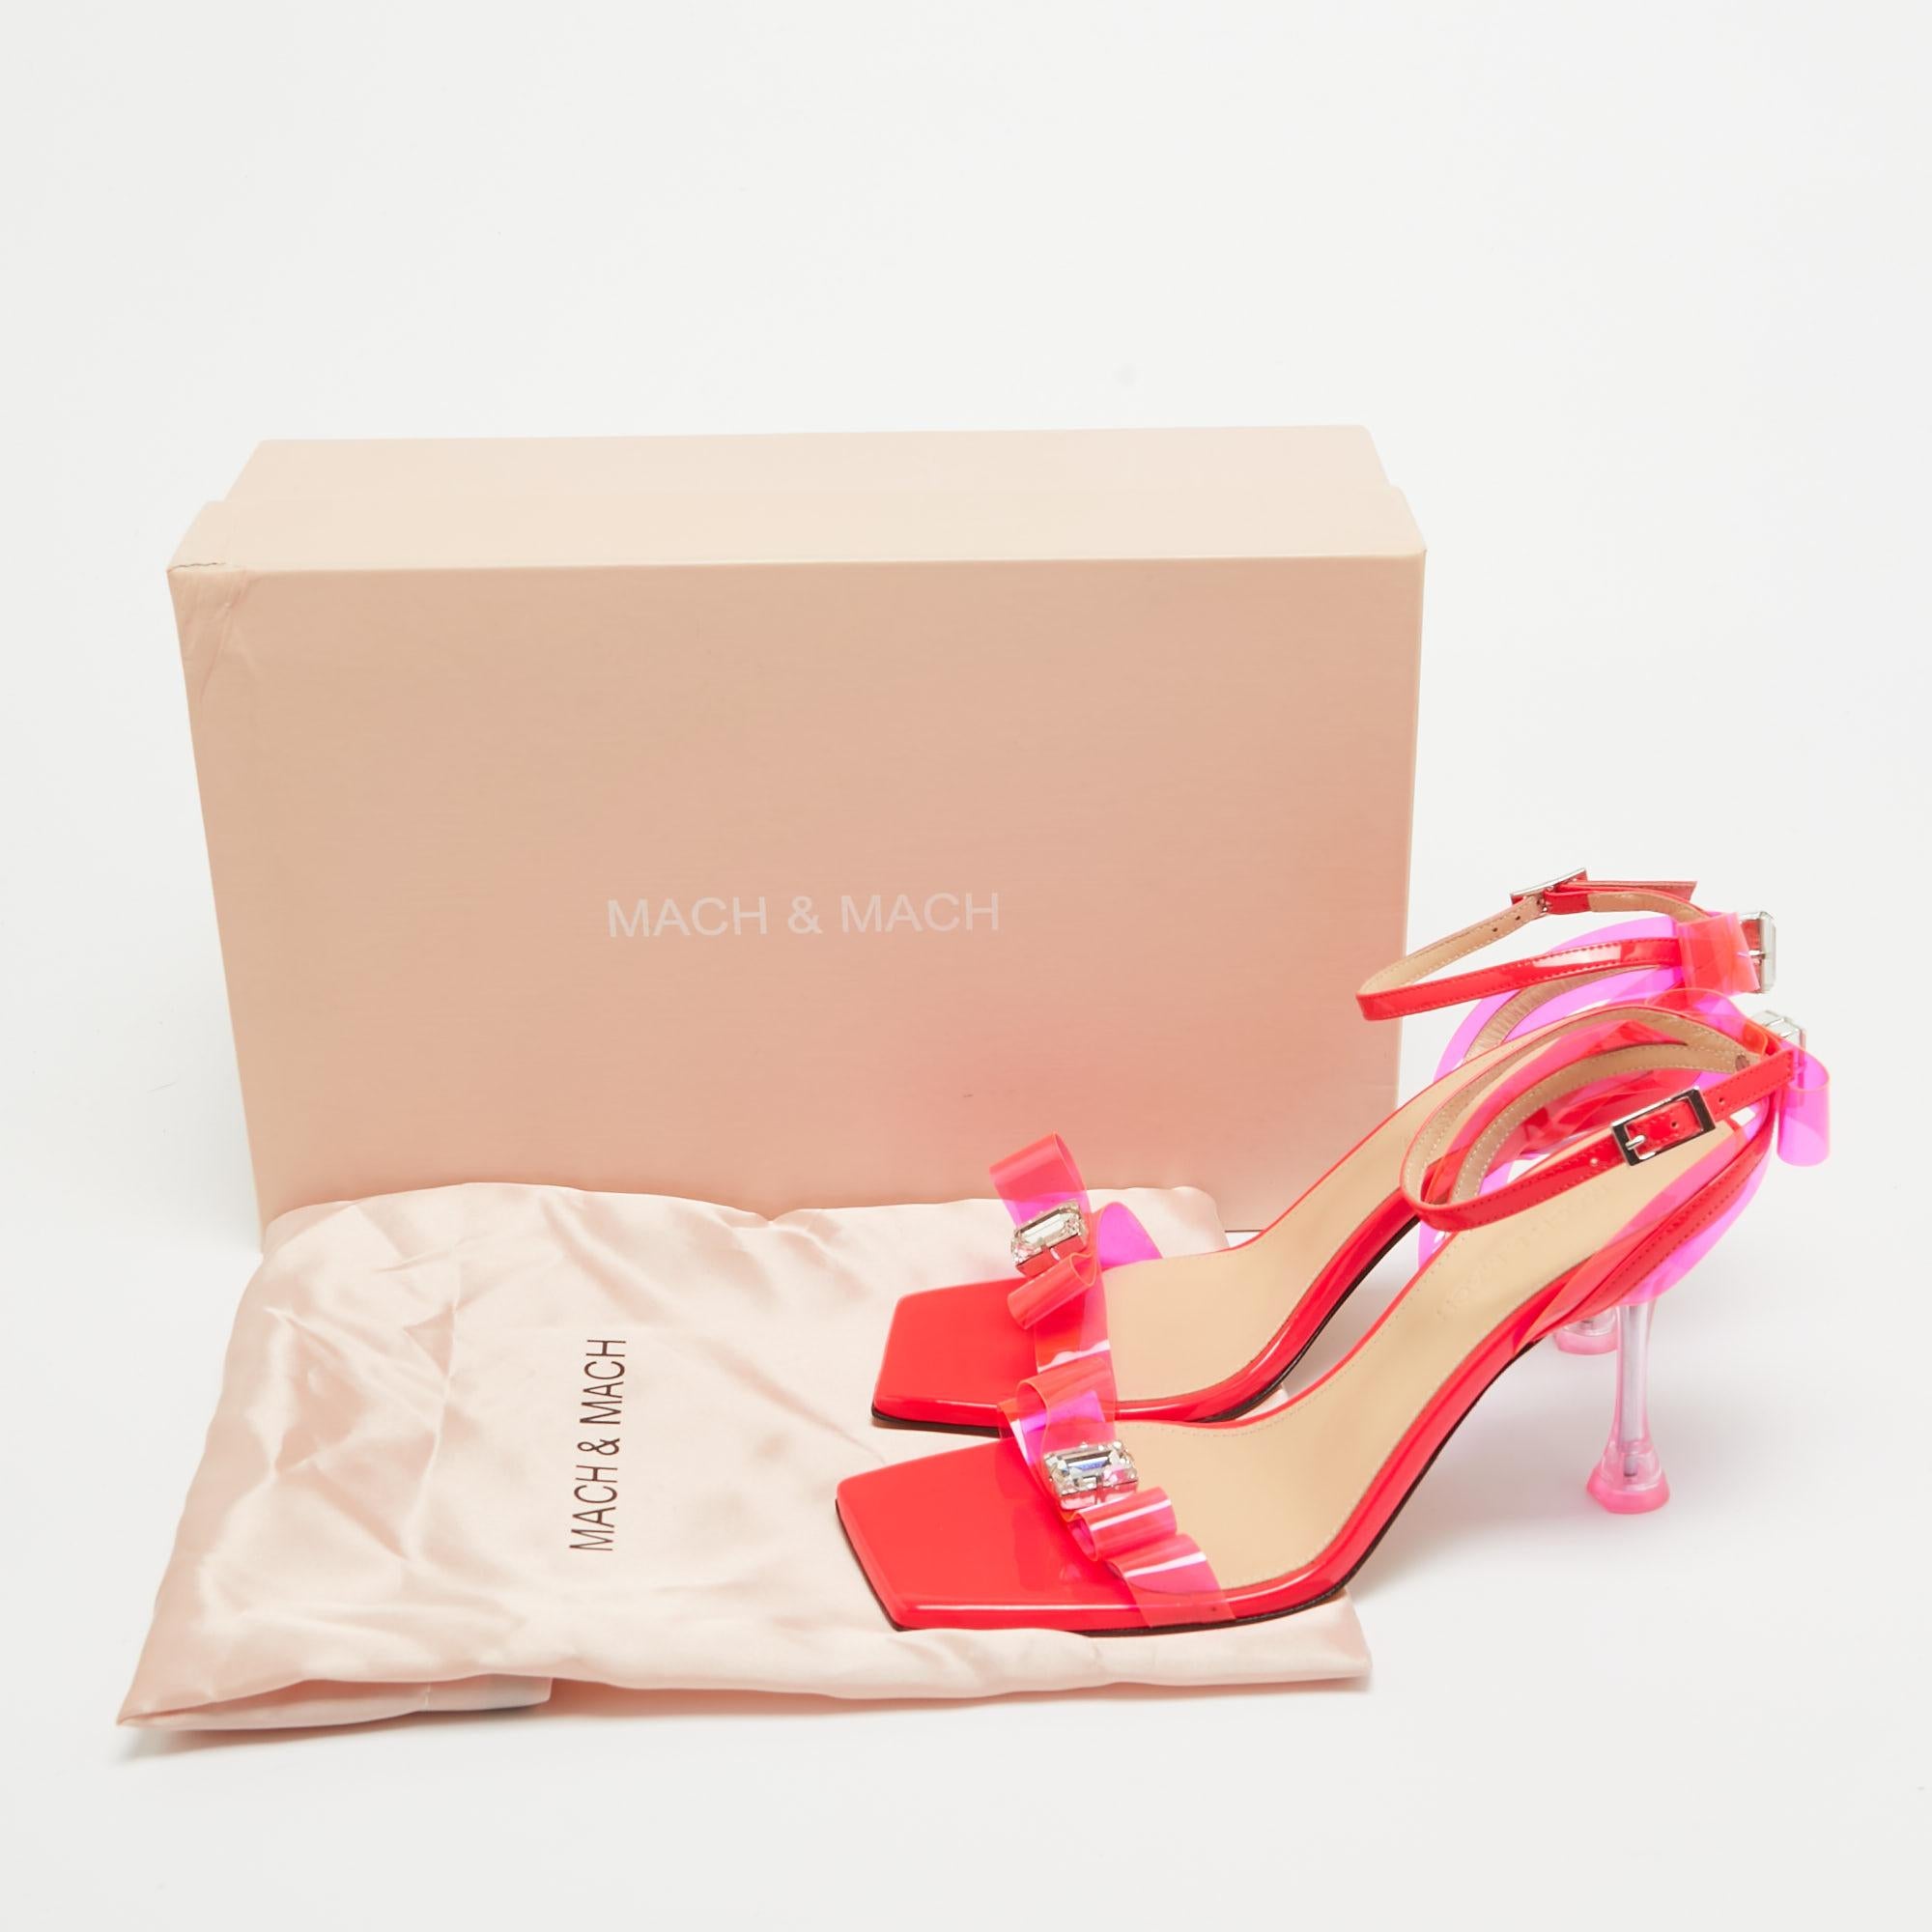 Mach & Mach Neon Pink PVC and Patent Leather French Bow Sandals Size 38 For Sale 2